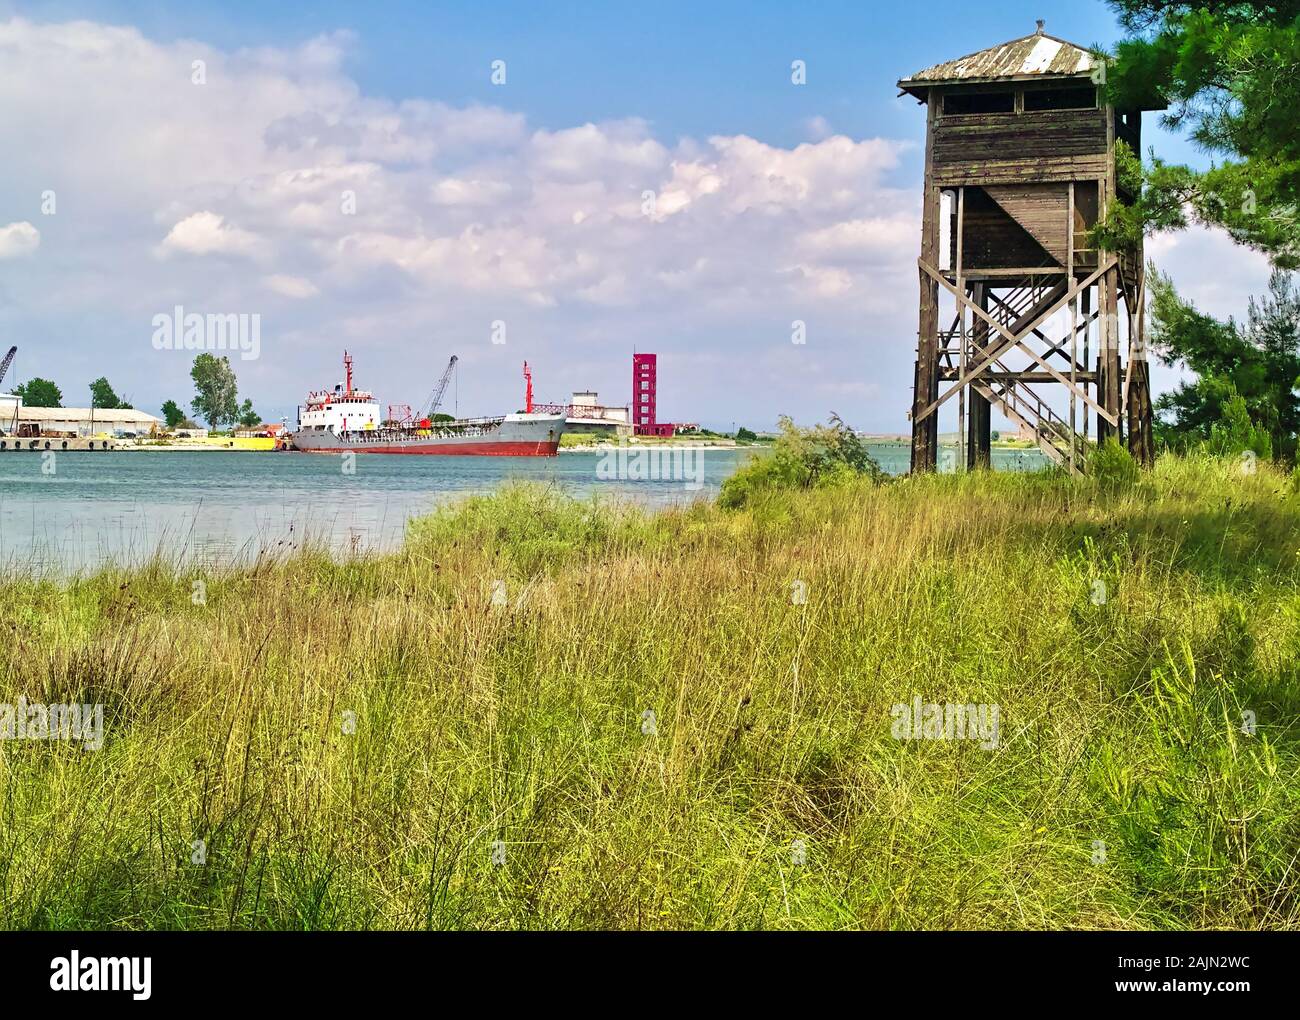 Wooden bird watch tower and port with commercial ships  and cranes. Grass and sky with clouds. Stock Photo